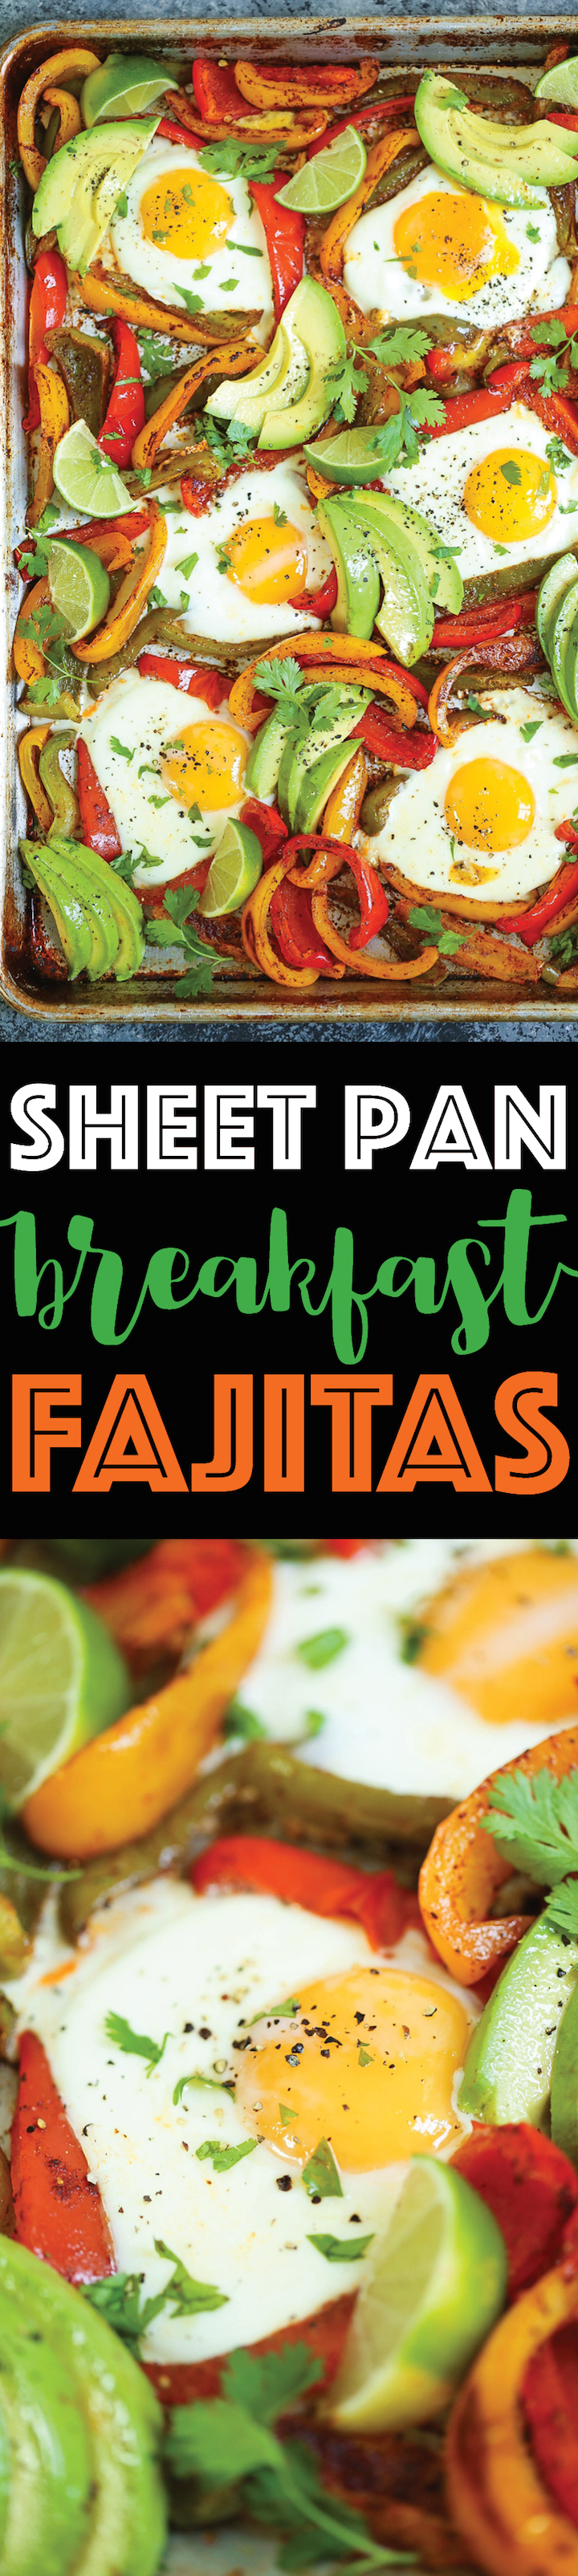 Sheet Pan Breakfast Fajitas - Everyone's favorite fajitas for breakfast! Loaded with bell peppers and eggs that cook right on the sheet pan! EASY CLEAN UP!